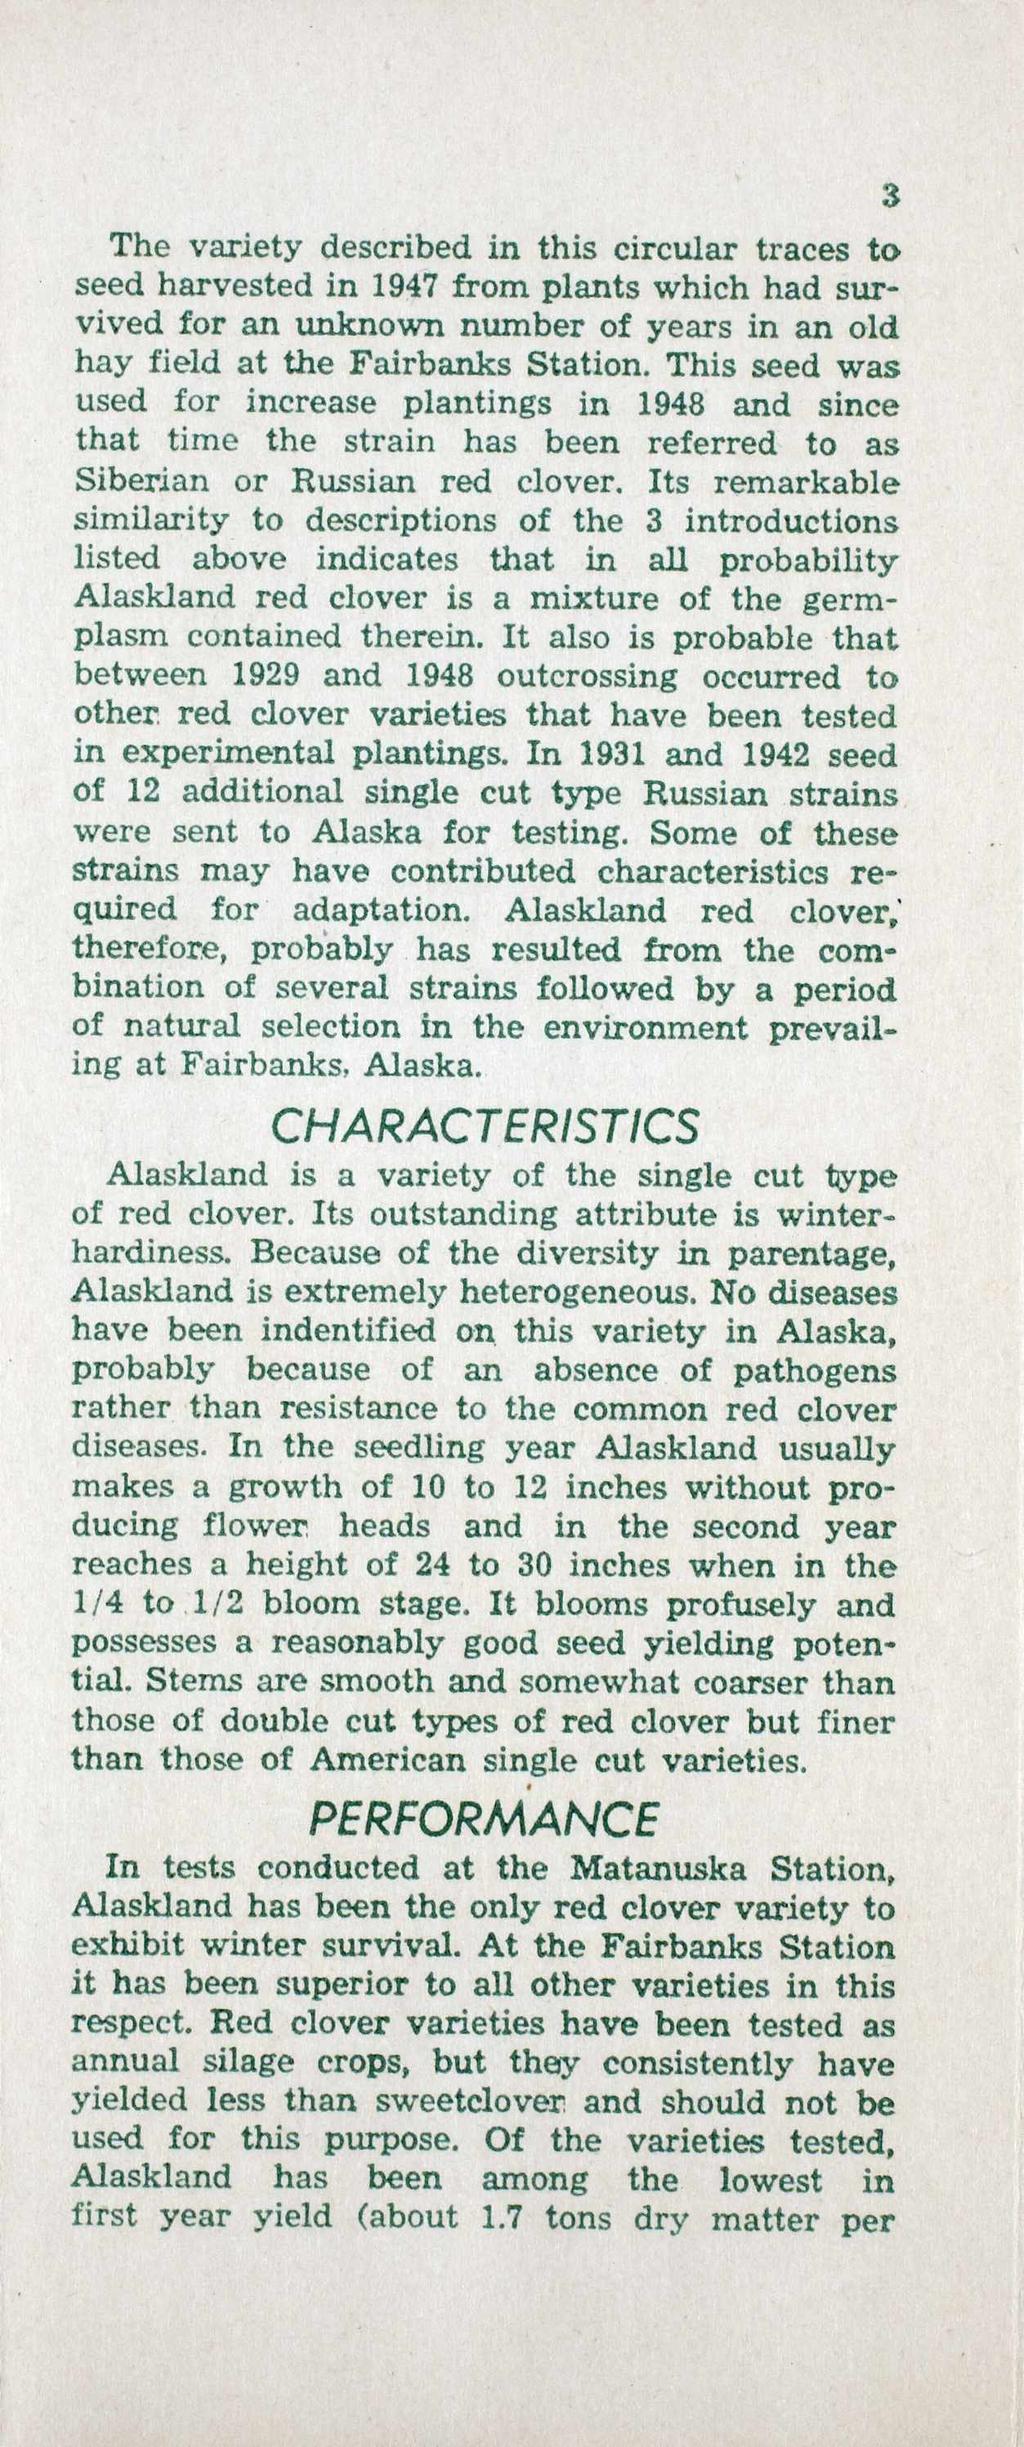 The variety described in this circular traces to seed harvested in 1947 from plants which had survived for an unknown number of years in an old hay field at the Fairbanks Station.